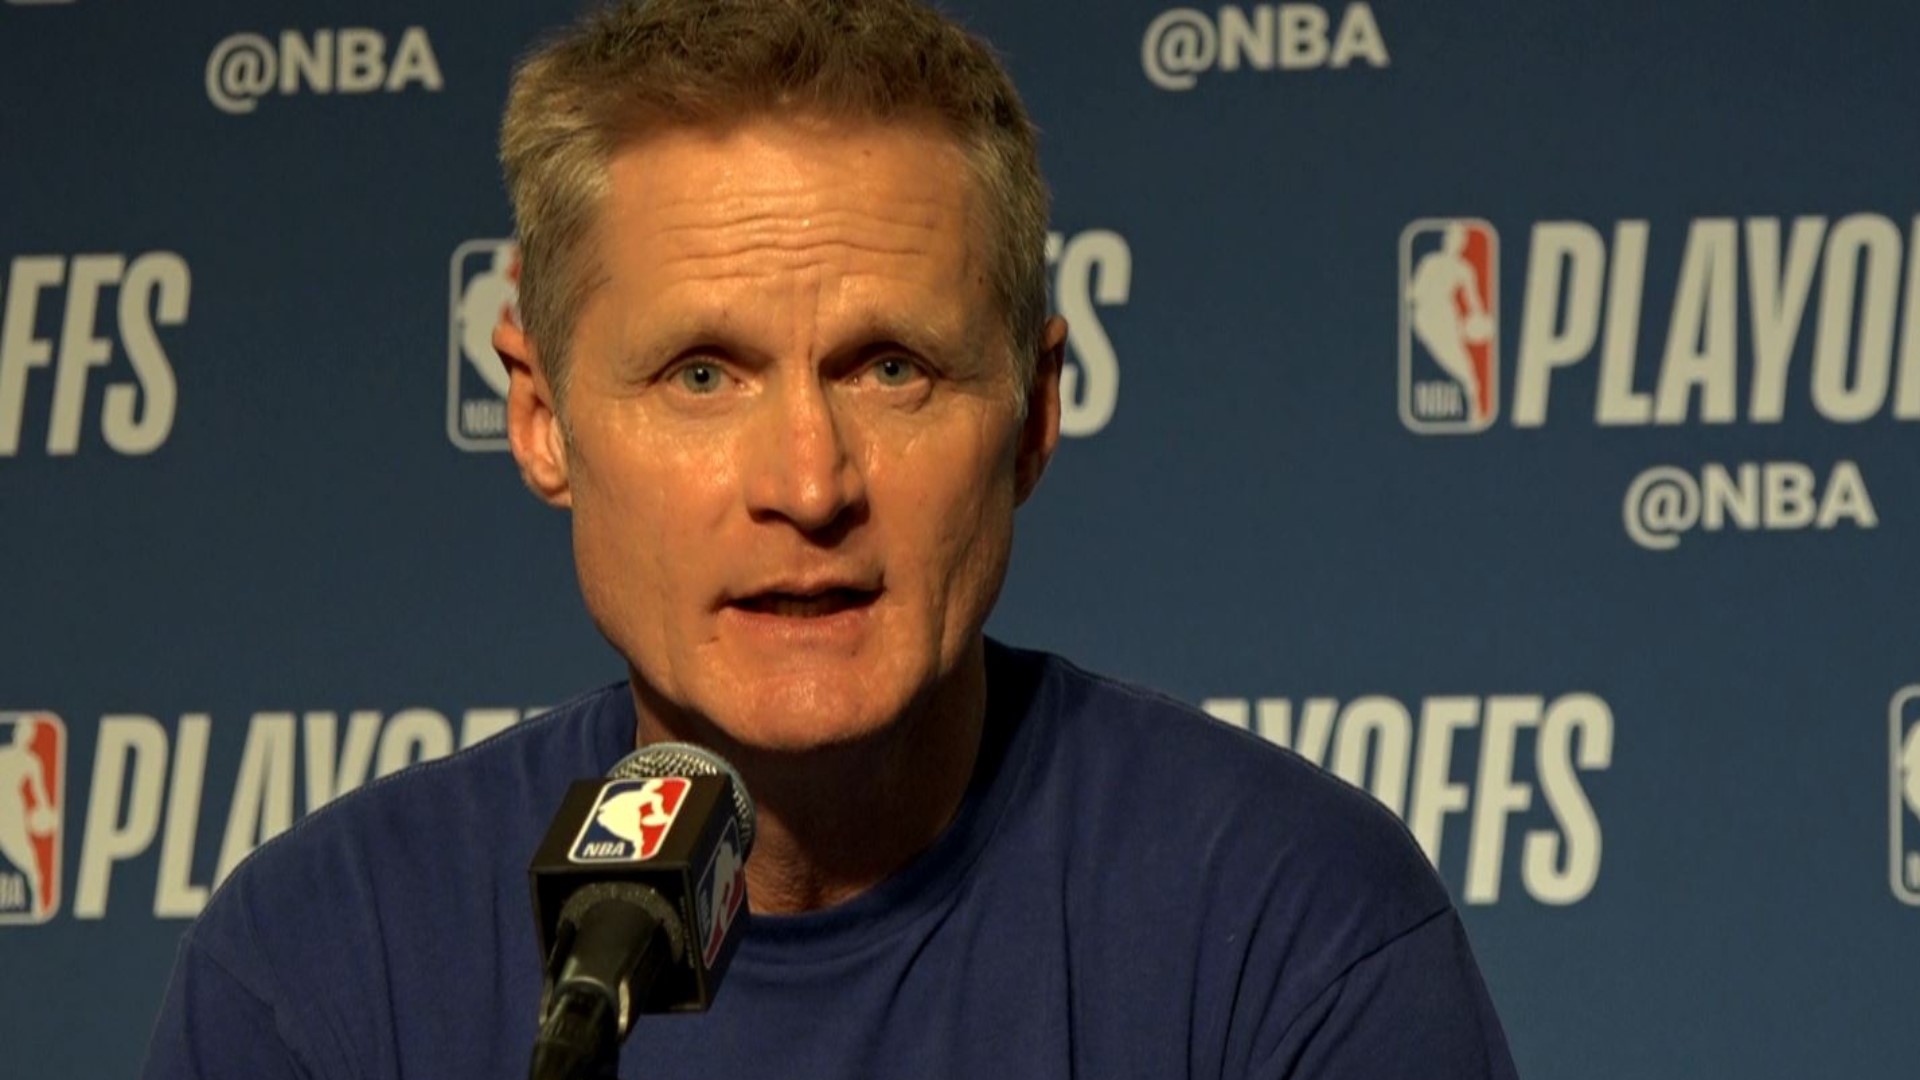 Warriors head coach Steve Kerr talks about Saturday's Game 1 playoff victory over the Los Angeles Clippers, the NBA playoff record set by Stephen Curry, the moment between Patrick Beverley and Kevin Durant that led to their ejection and the playoff debut of DeMarcus Cousins.